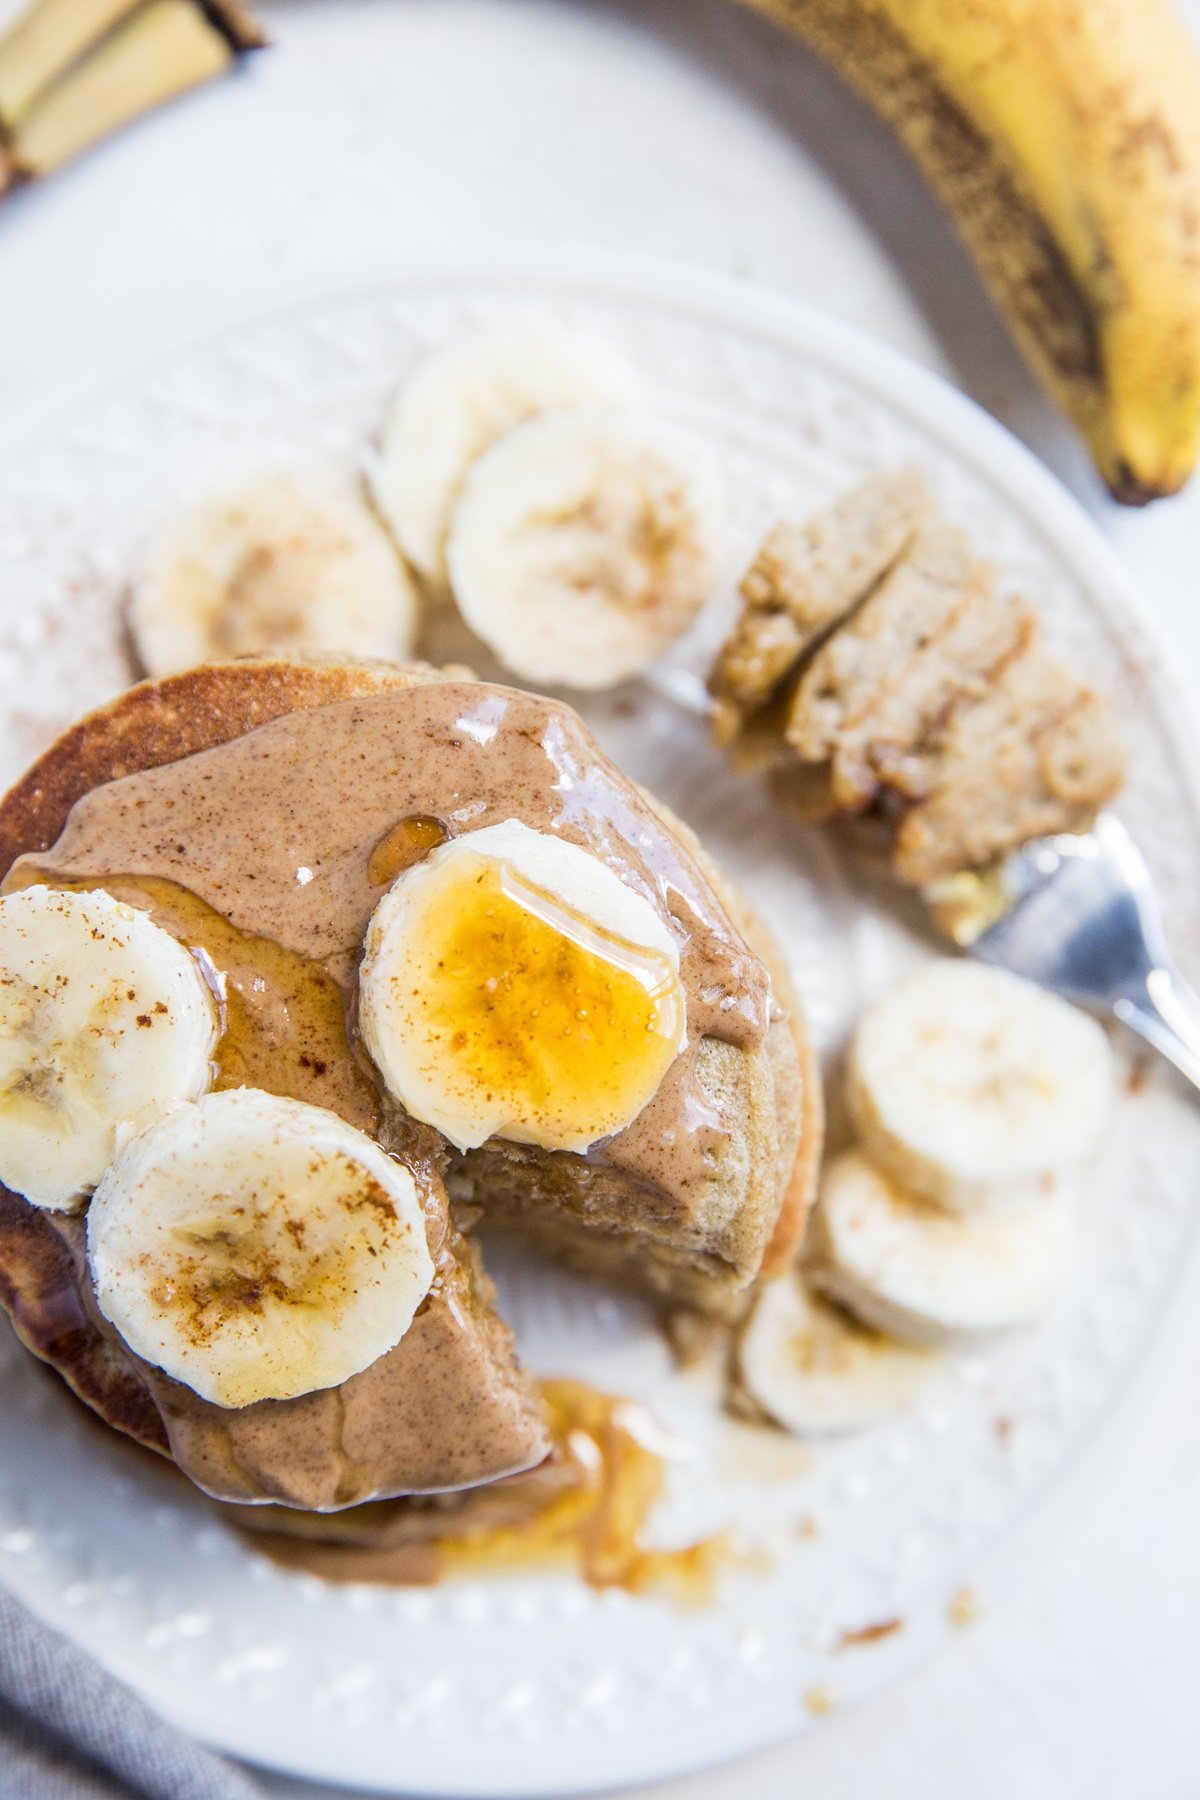 6-Ingredient Flourless Gluten-Free Banana Pancakes made with quick oats. Dairy-free, fluffy and delicious healthy pancake recipe